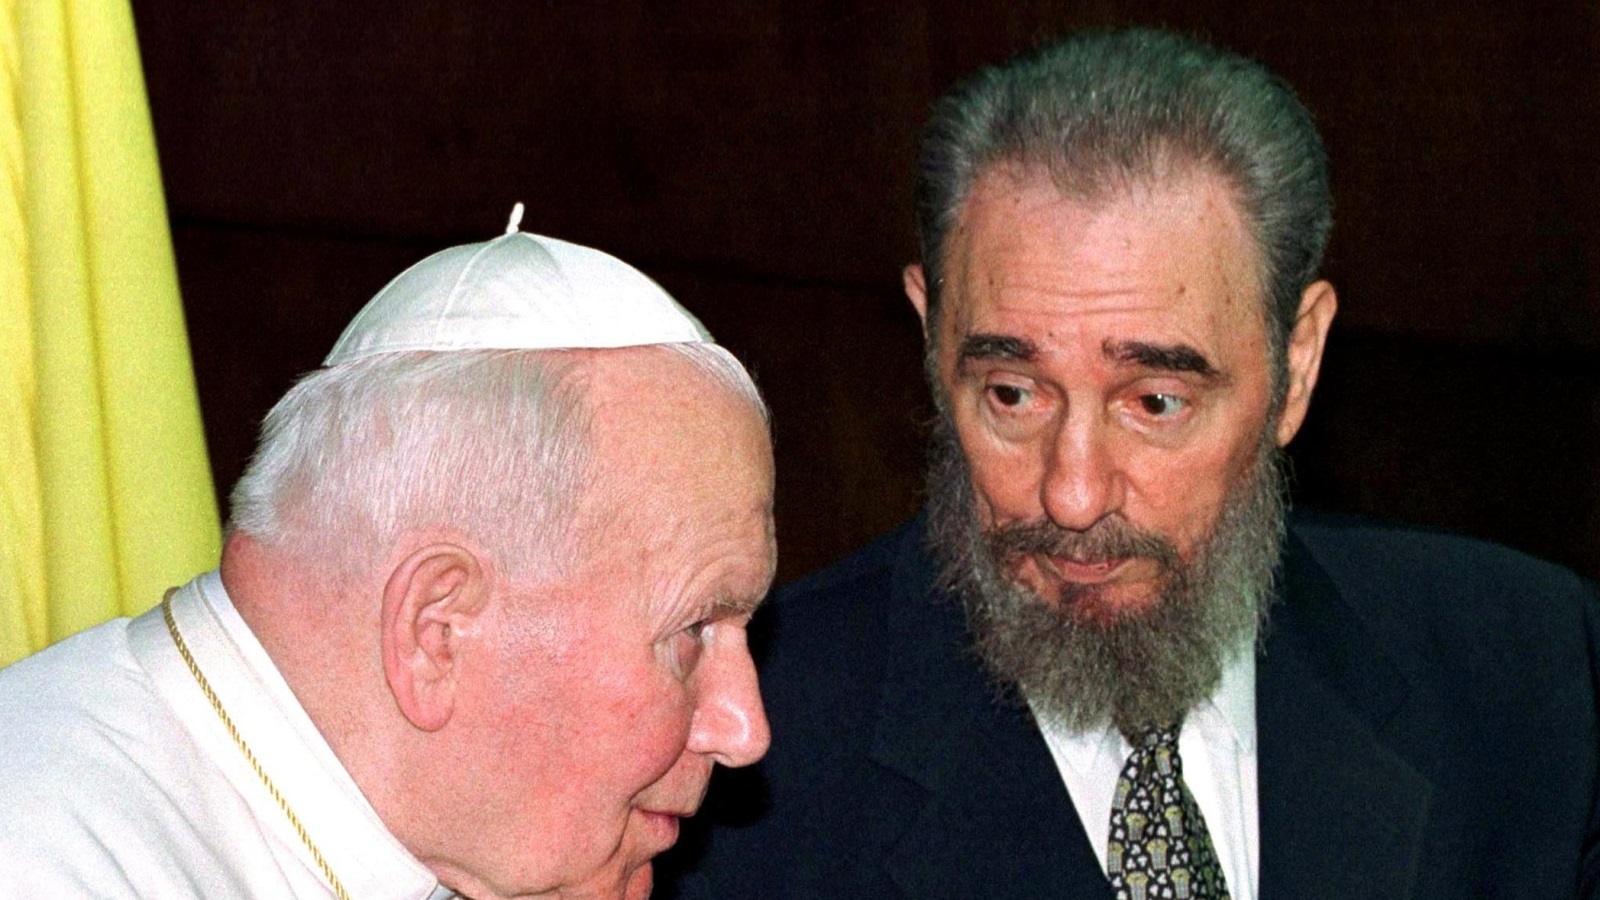 Then Cuban President Fidel Castro talks to then Pope John Paul II during the presentation of their delegations at the Palace of the Revolution in Havana in this January 22, 1998 file photo. REUTERS/Paul Hanna/File Photo